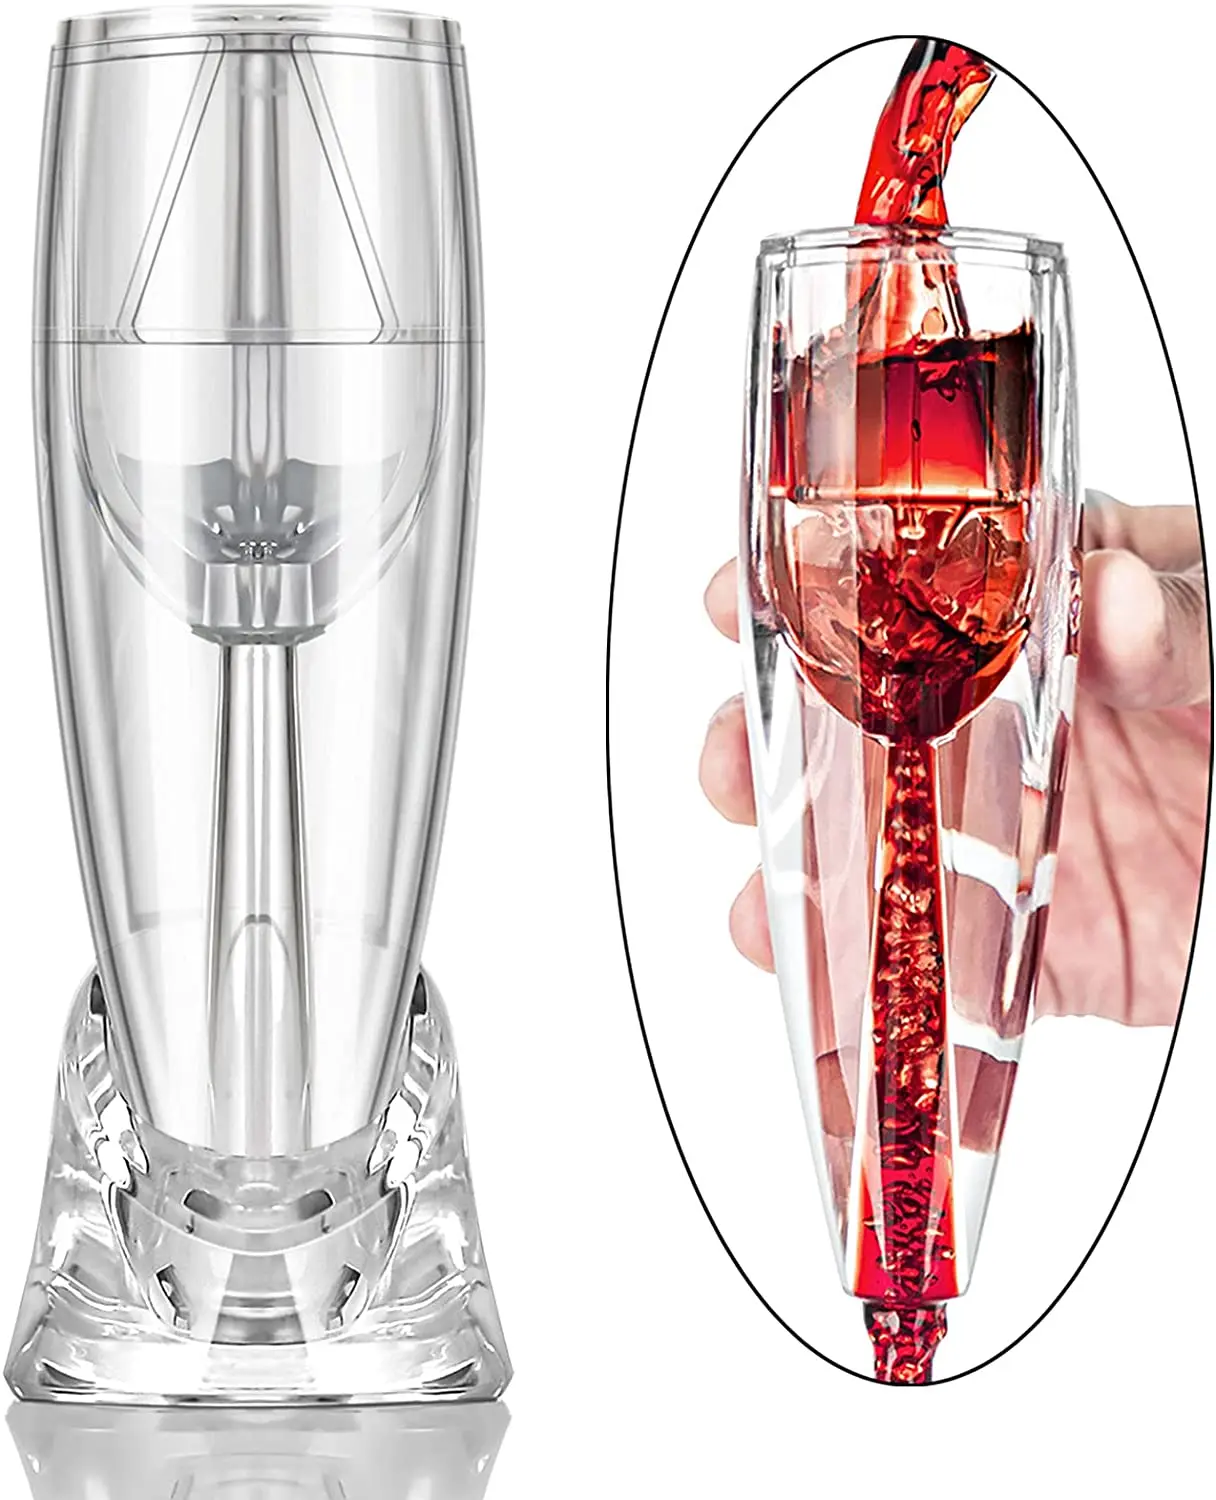 

Wine Purifier Wine Aeration Aerating Dispensers Decanter Crystal Carafe Wine Aerator With Stand